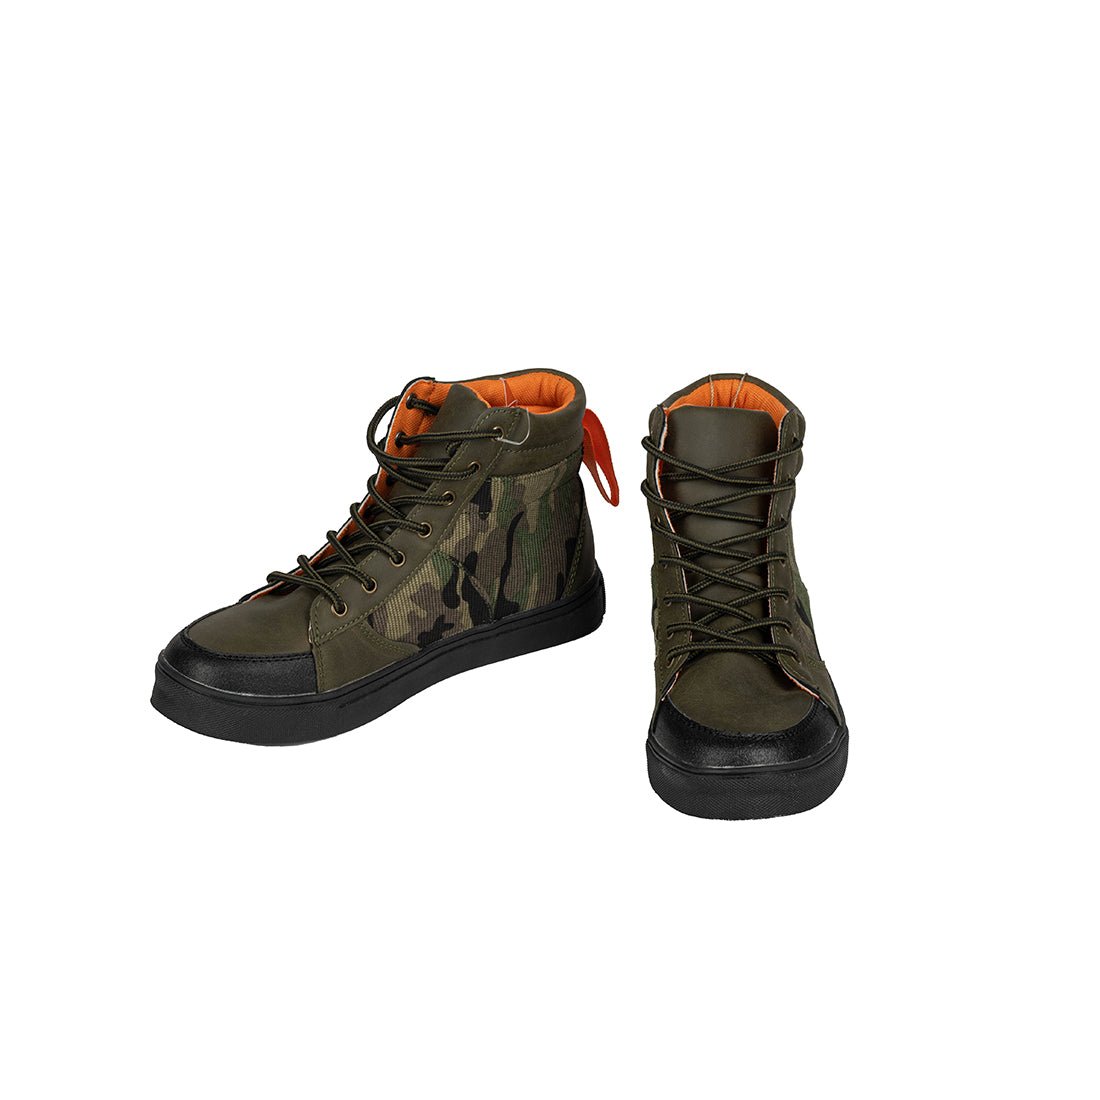 Deer Stags Brand New Shoes For Boys - mymadstore.com